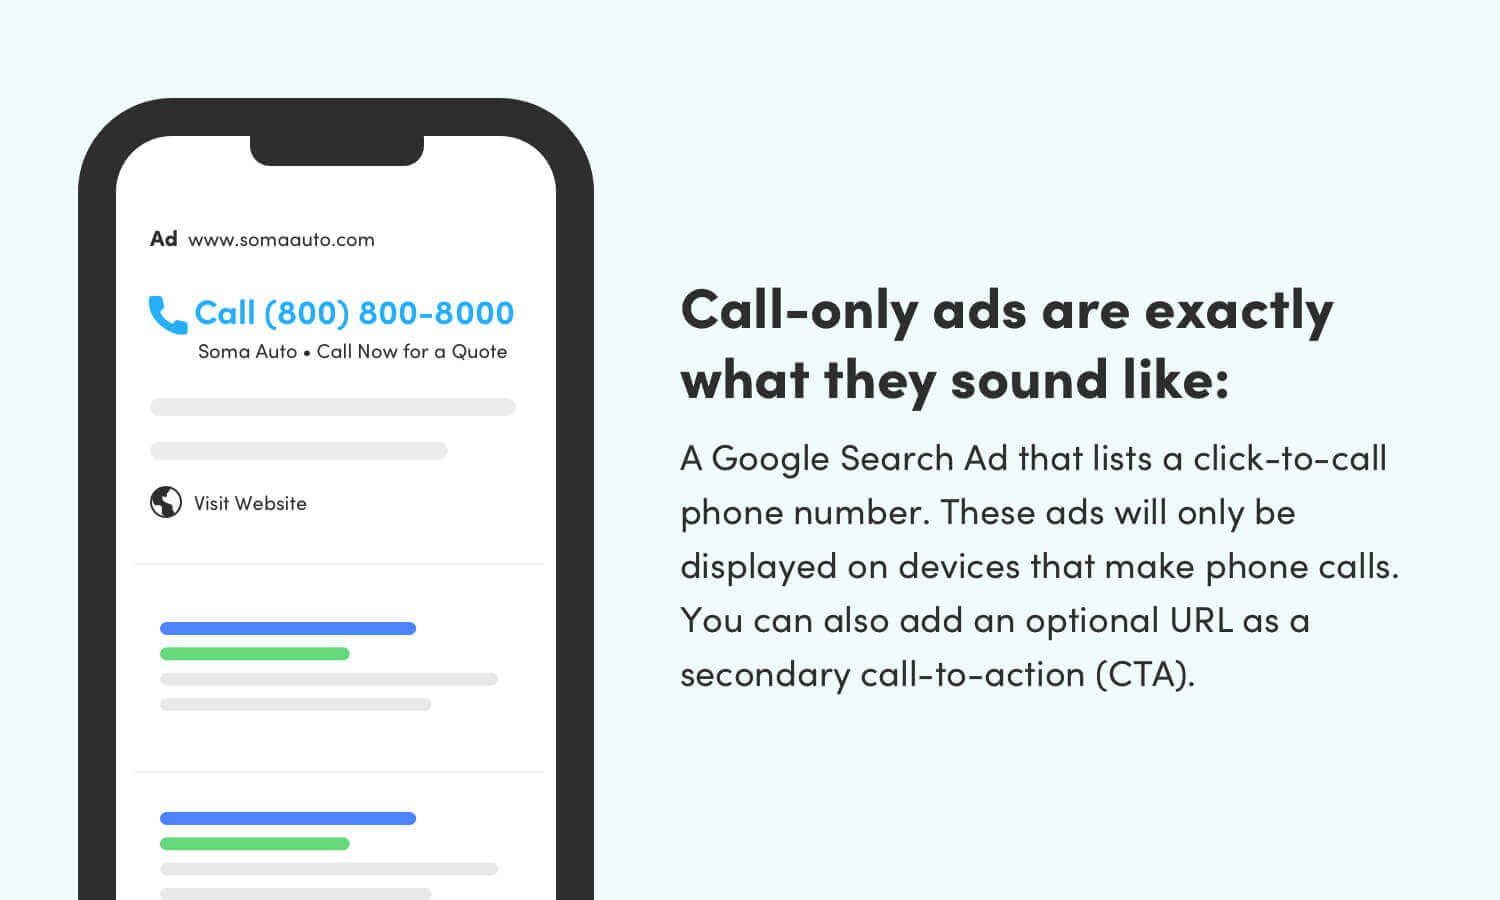 A Google call-only ad on a mobile device